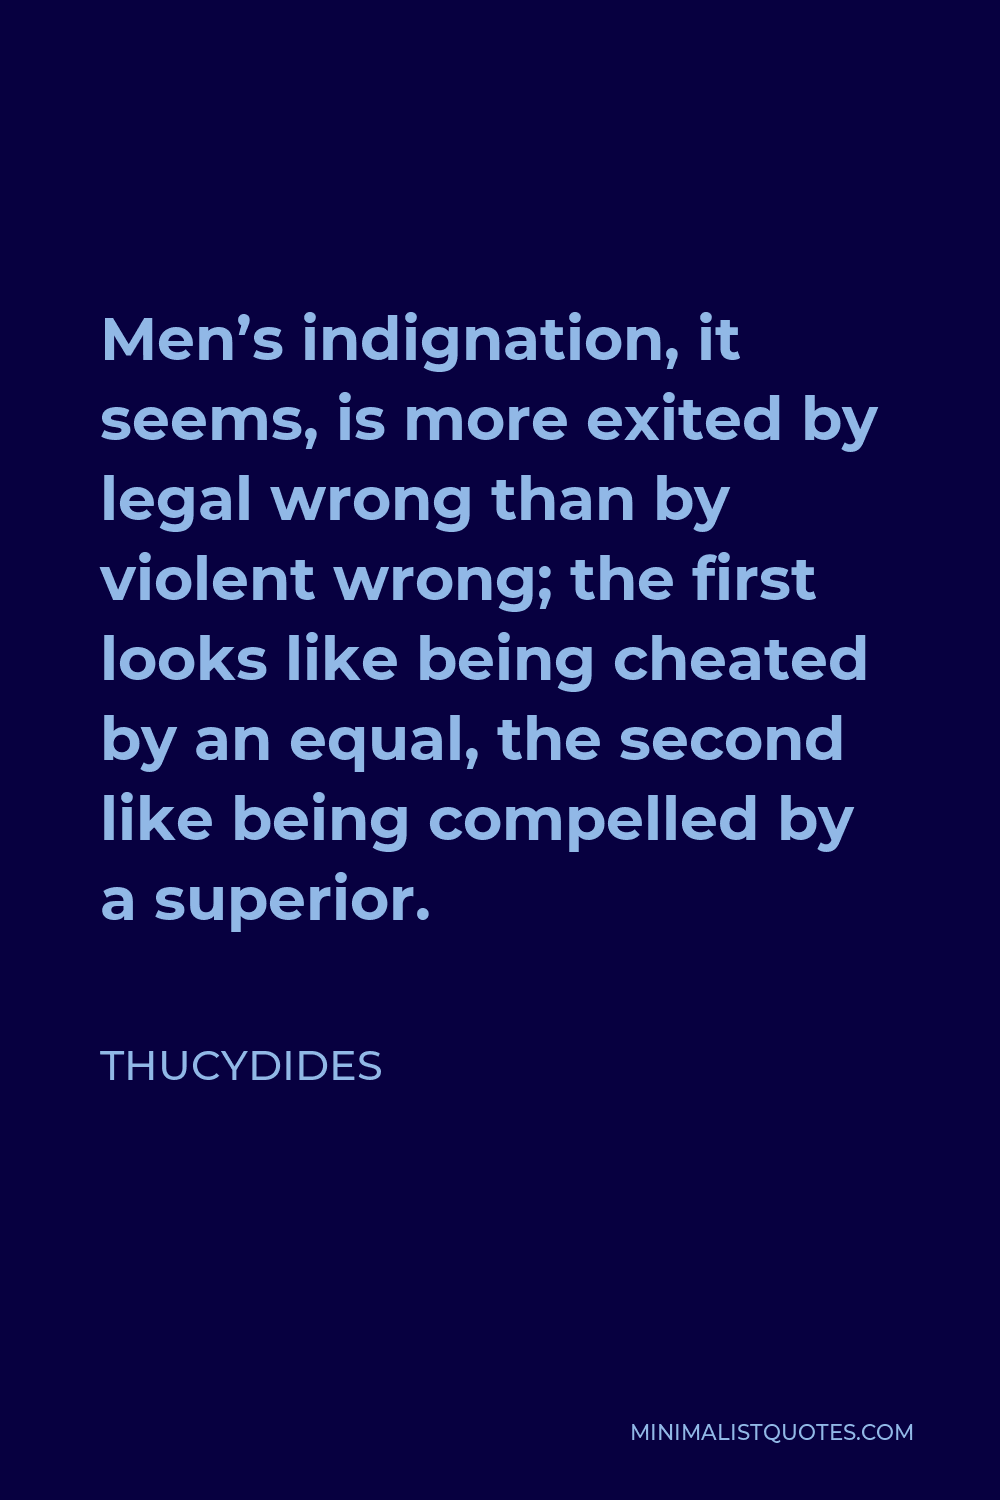 Thucydides Quote - Men’s indignation, it seems, is more exited by legal wrong than by violent wrong; the first looks like being cheated by an equal, the second like being compelled by a superior.